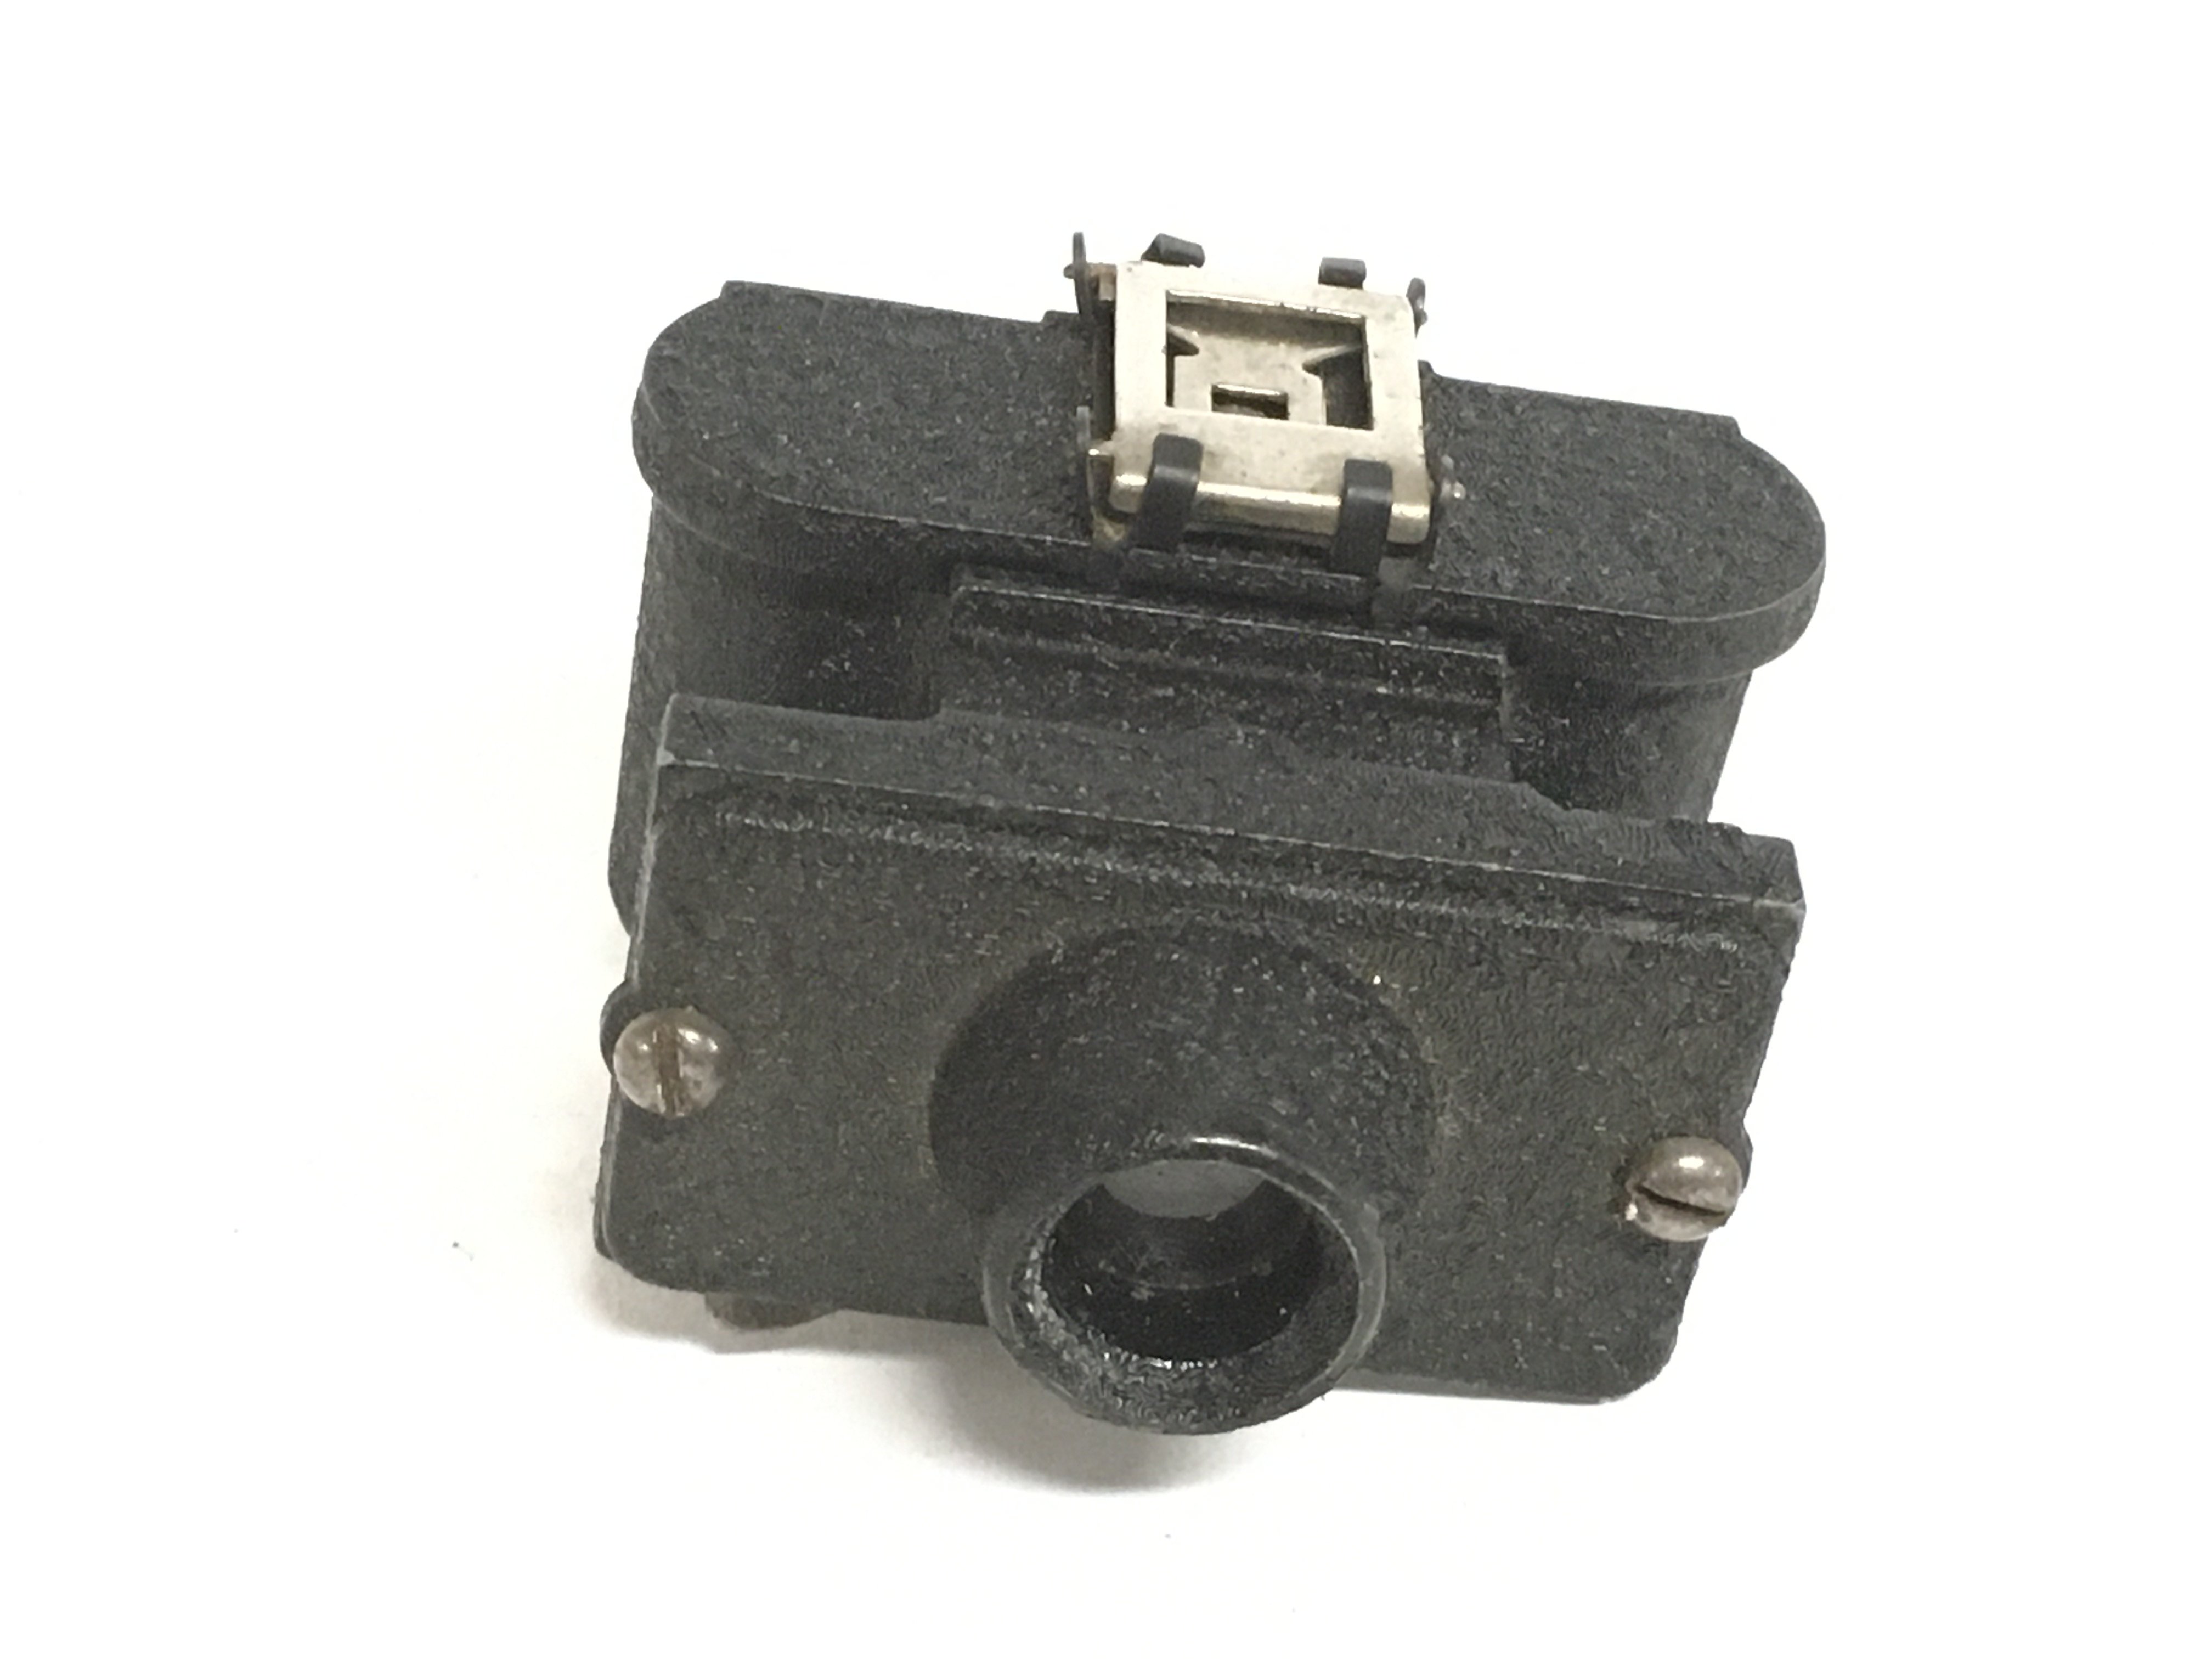 A micro 8mm camera. This lot cannot be posted - Image 4 of 5